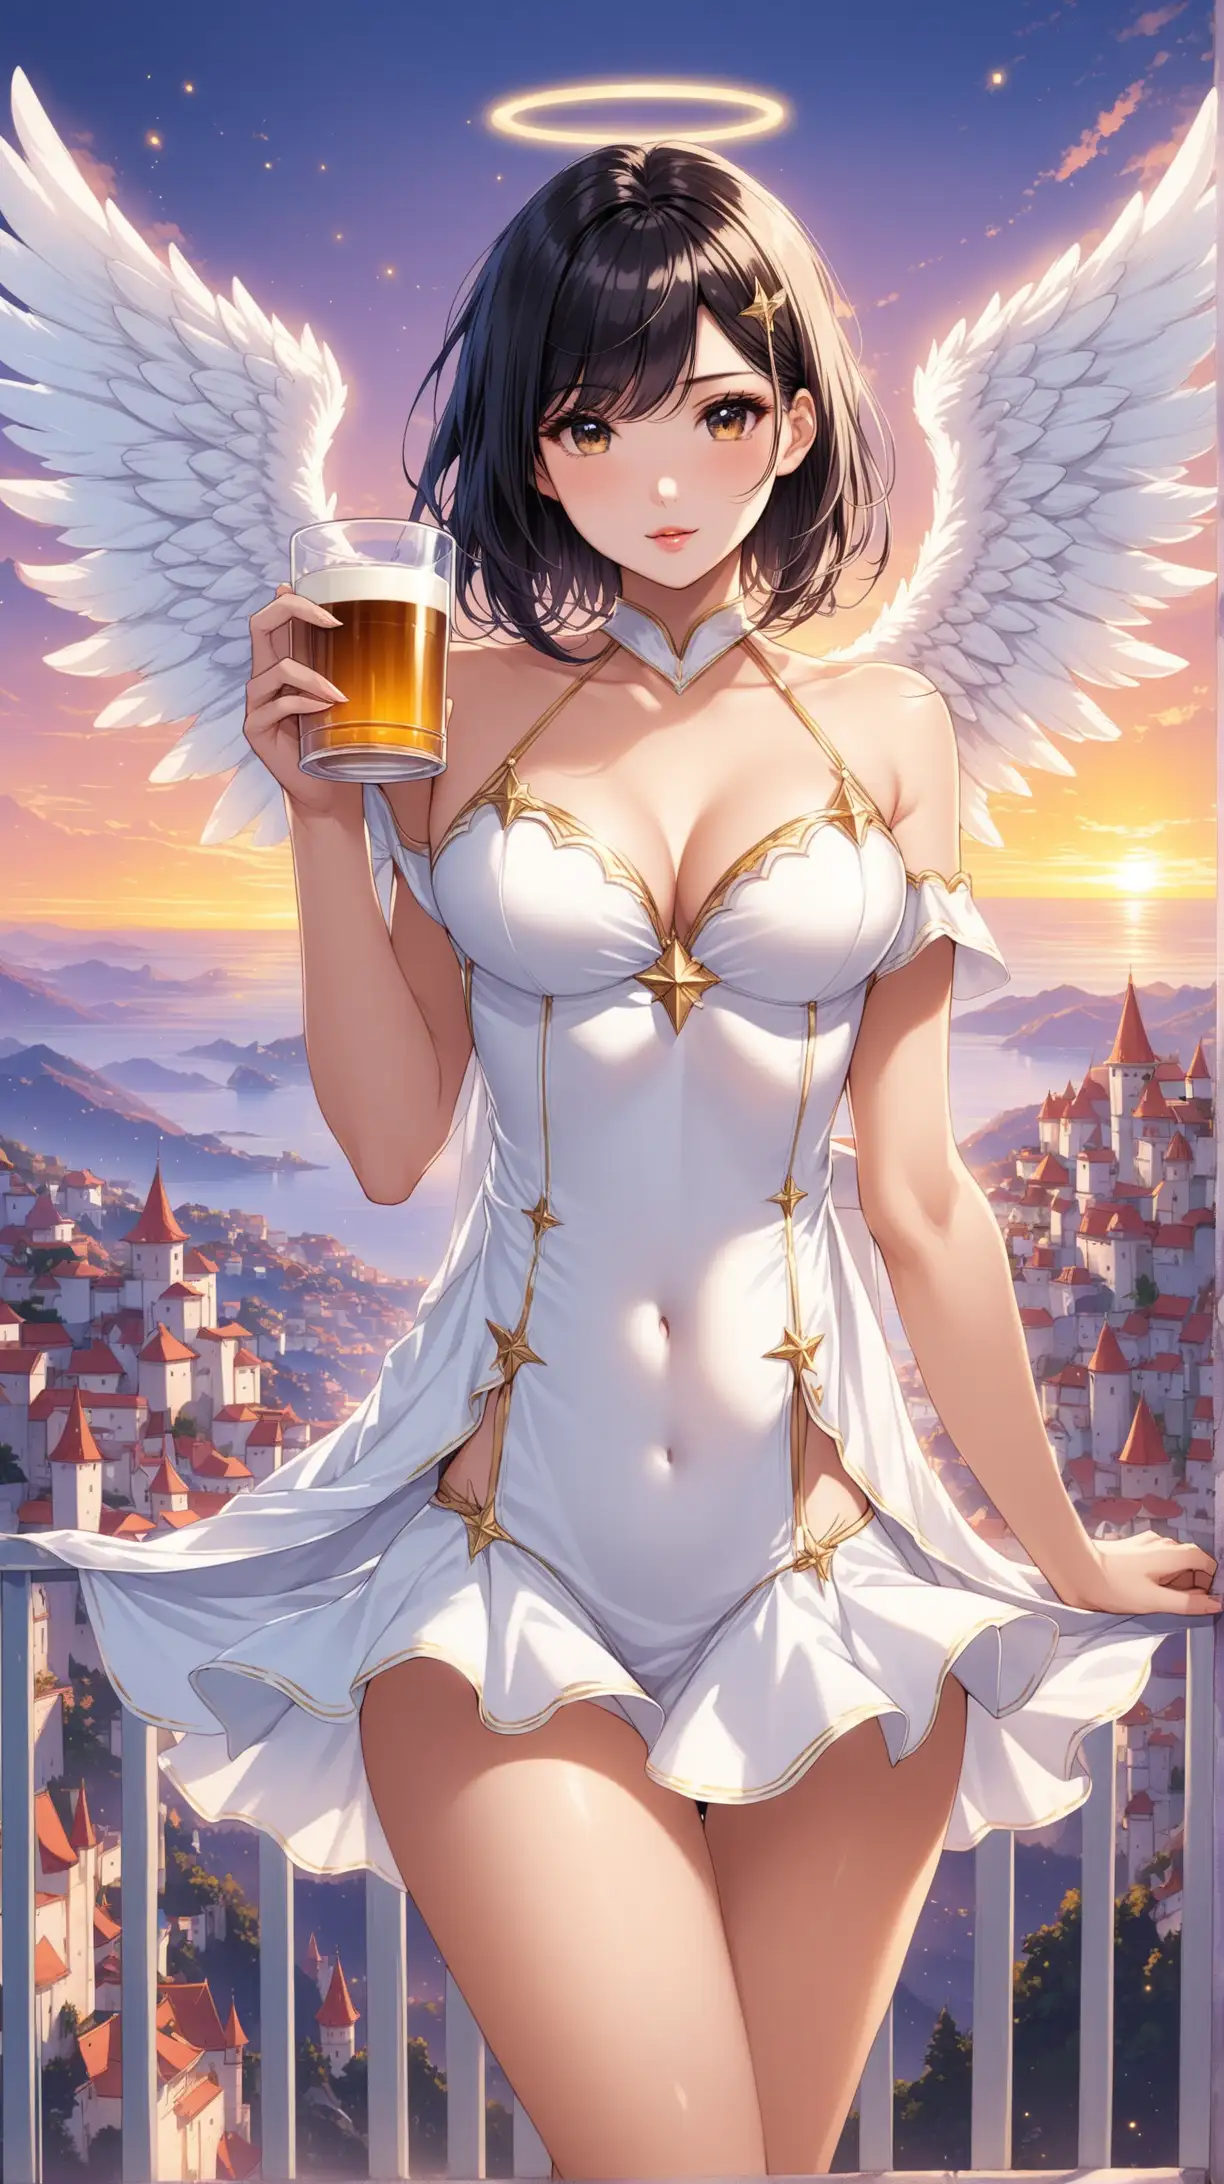 Elegant Angel in White Dress Carrying a Cup Against a Mystical Backdrop